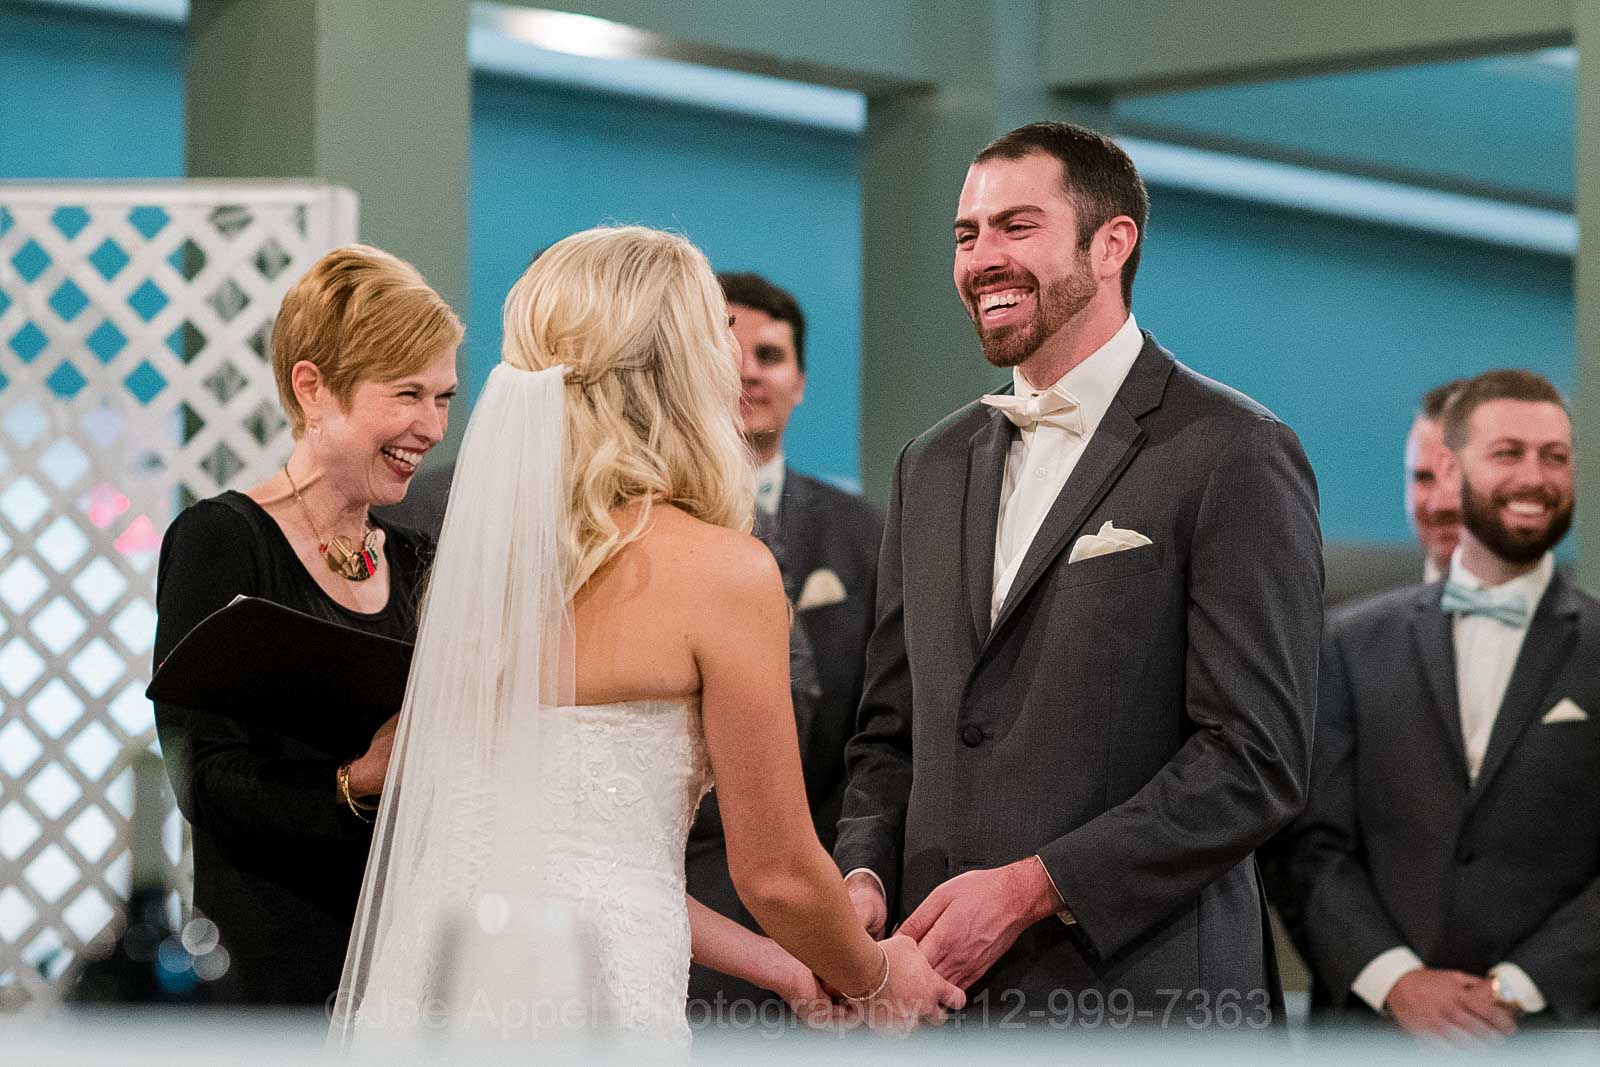 A groom laughs as he holds his bride's hands during their wedding ceremony at the Embassy Suites hotel near Pittsburgh International Airport.